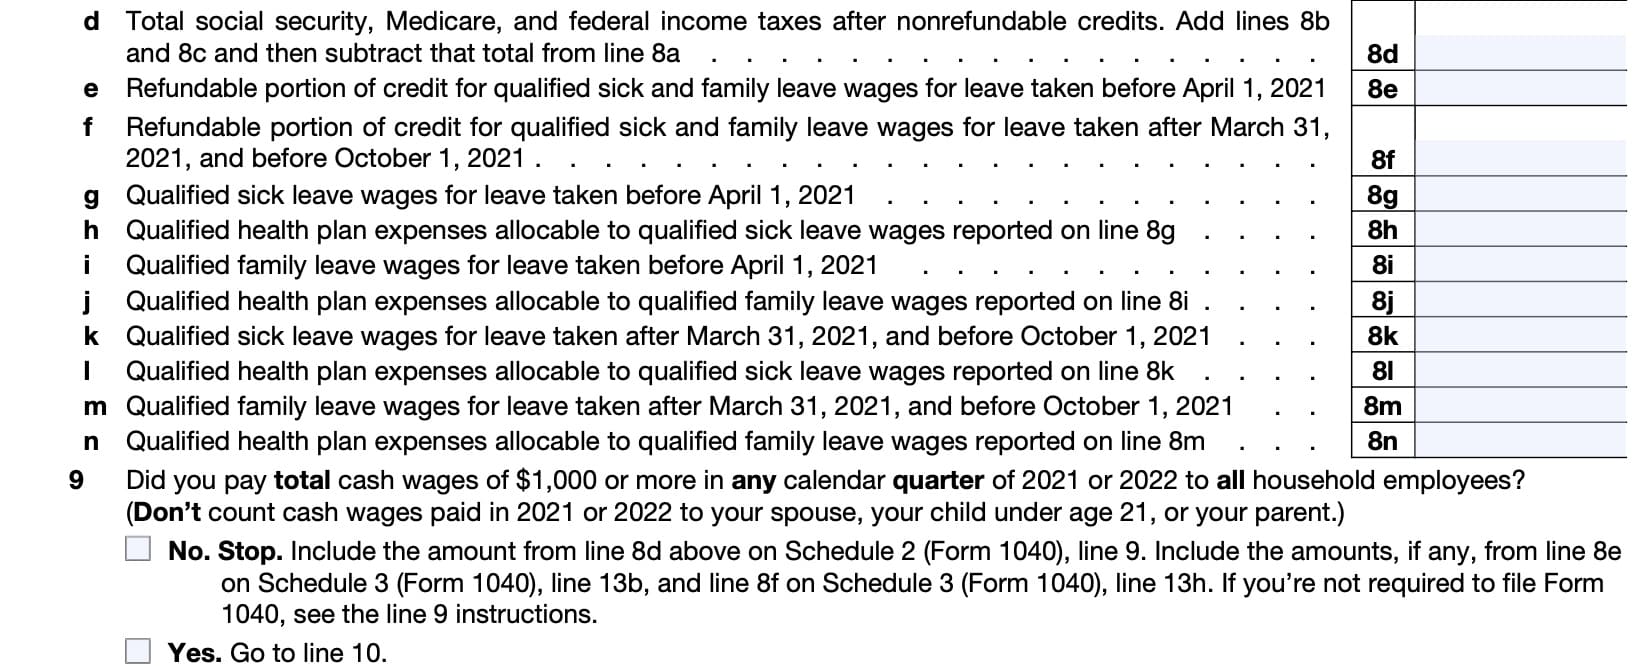 IRS Schedule H, Part I, continued